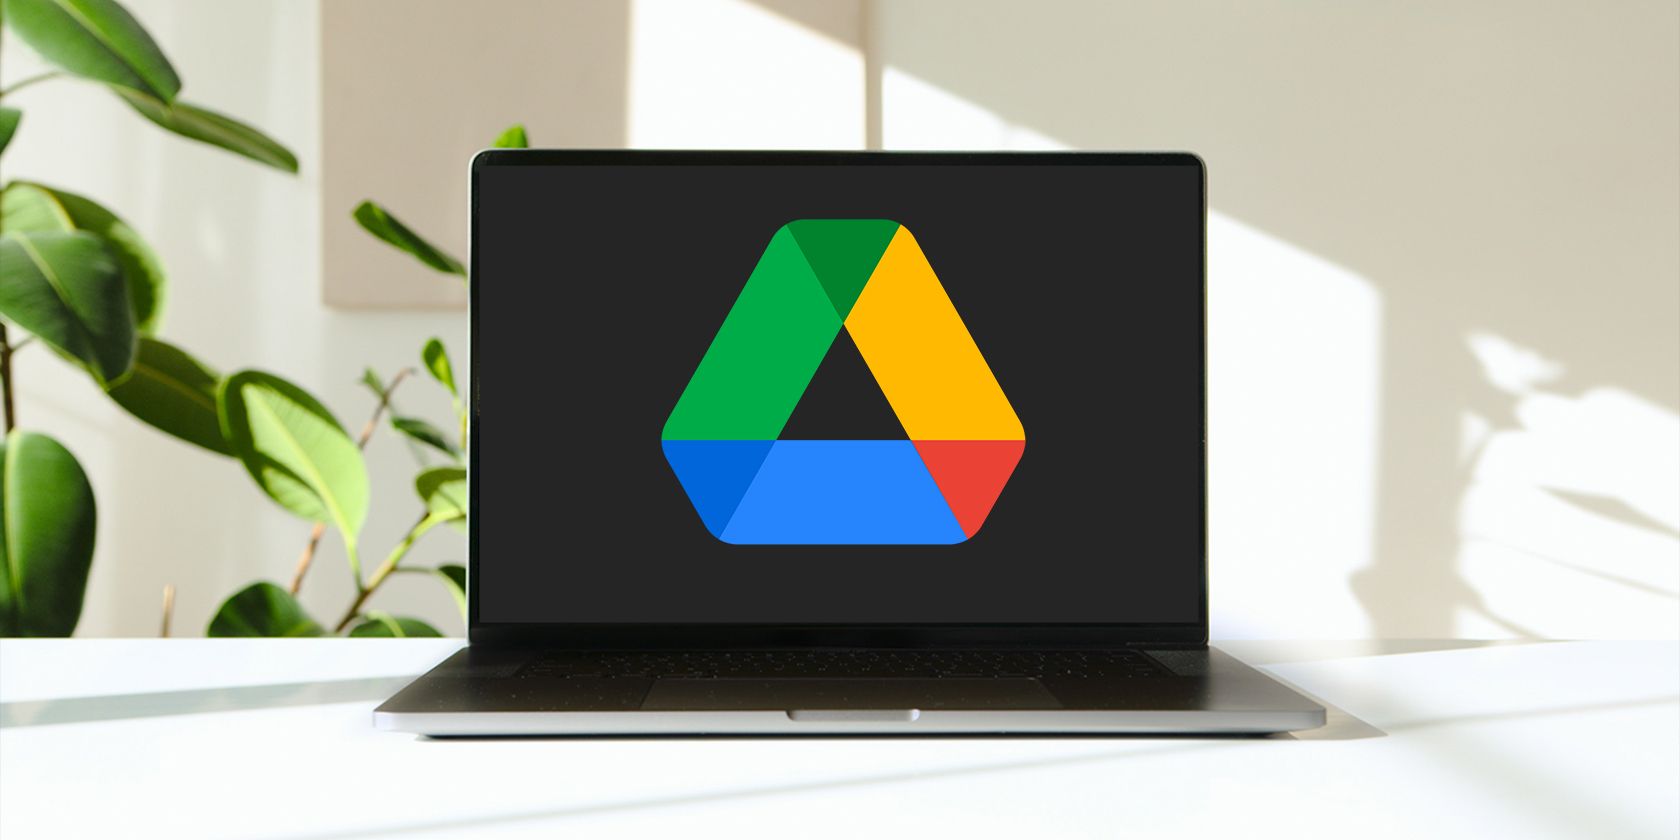 How to Fix Google Drive “Couldn't Preview File” Error